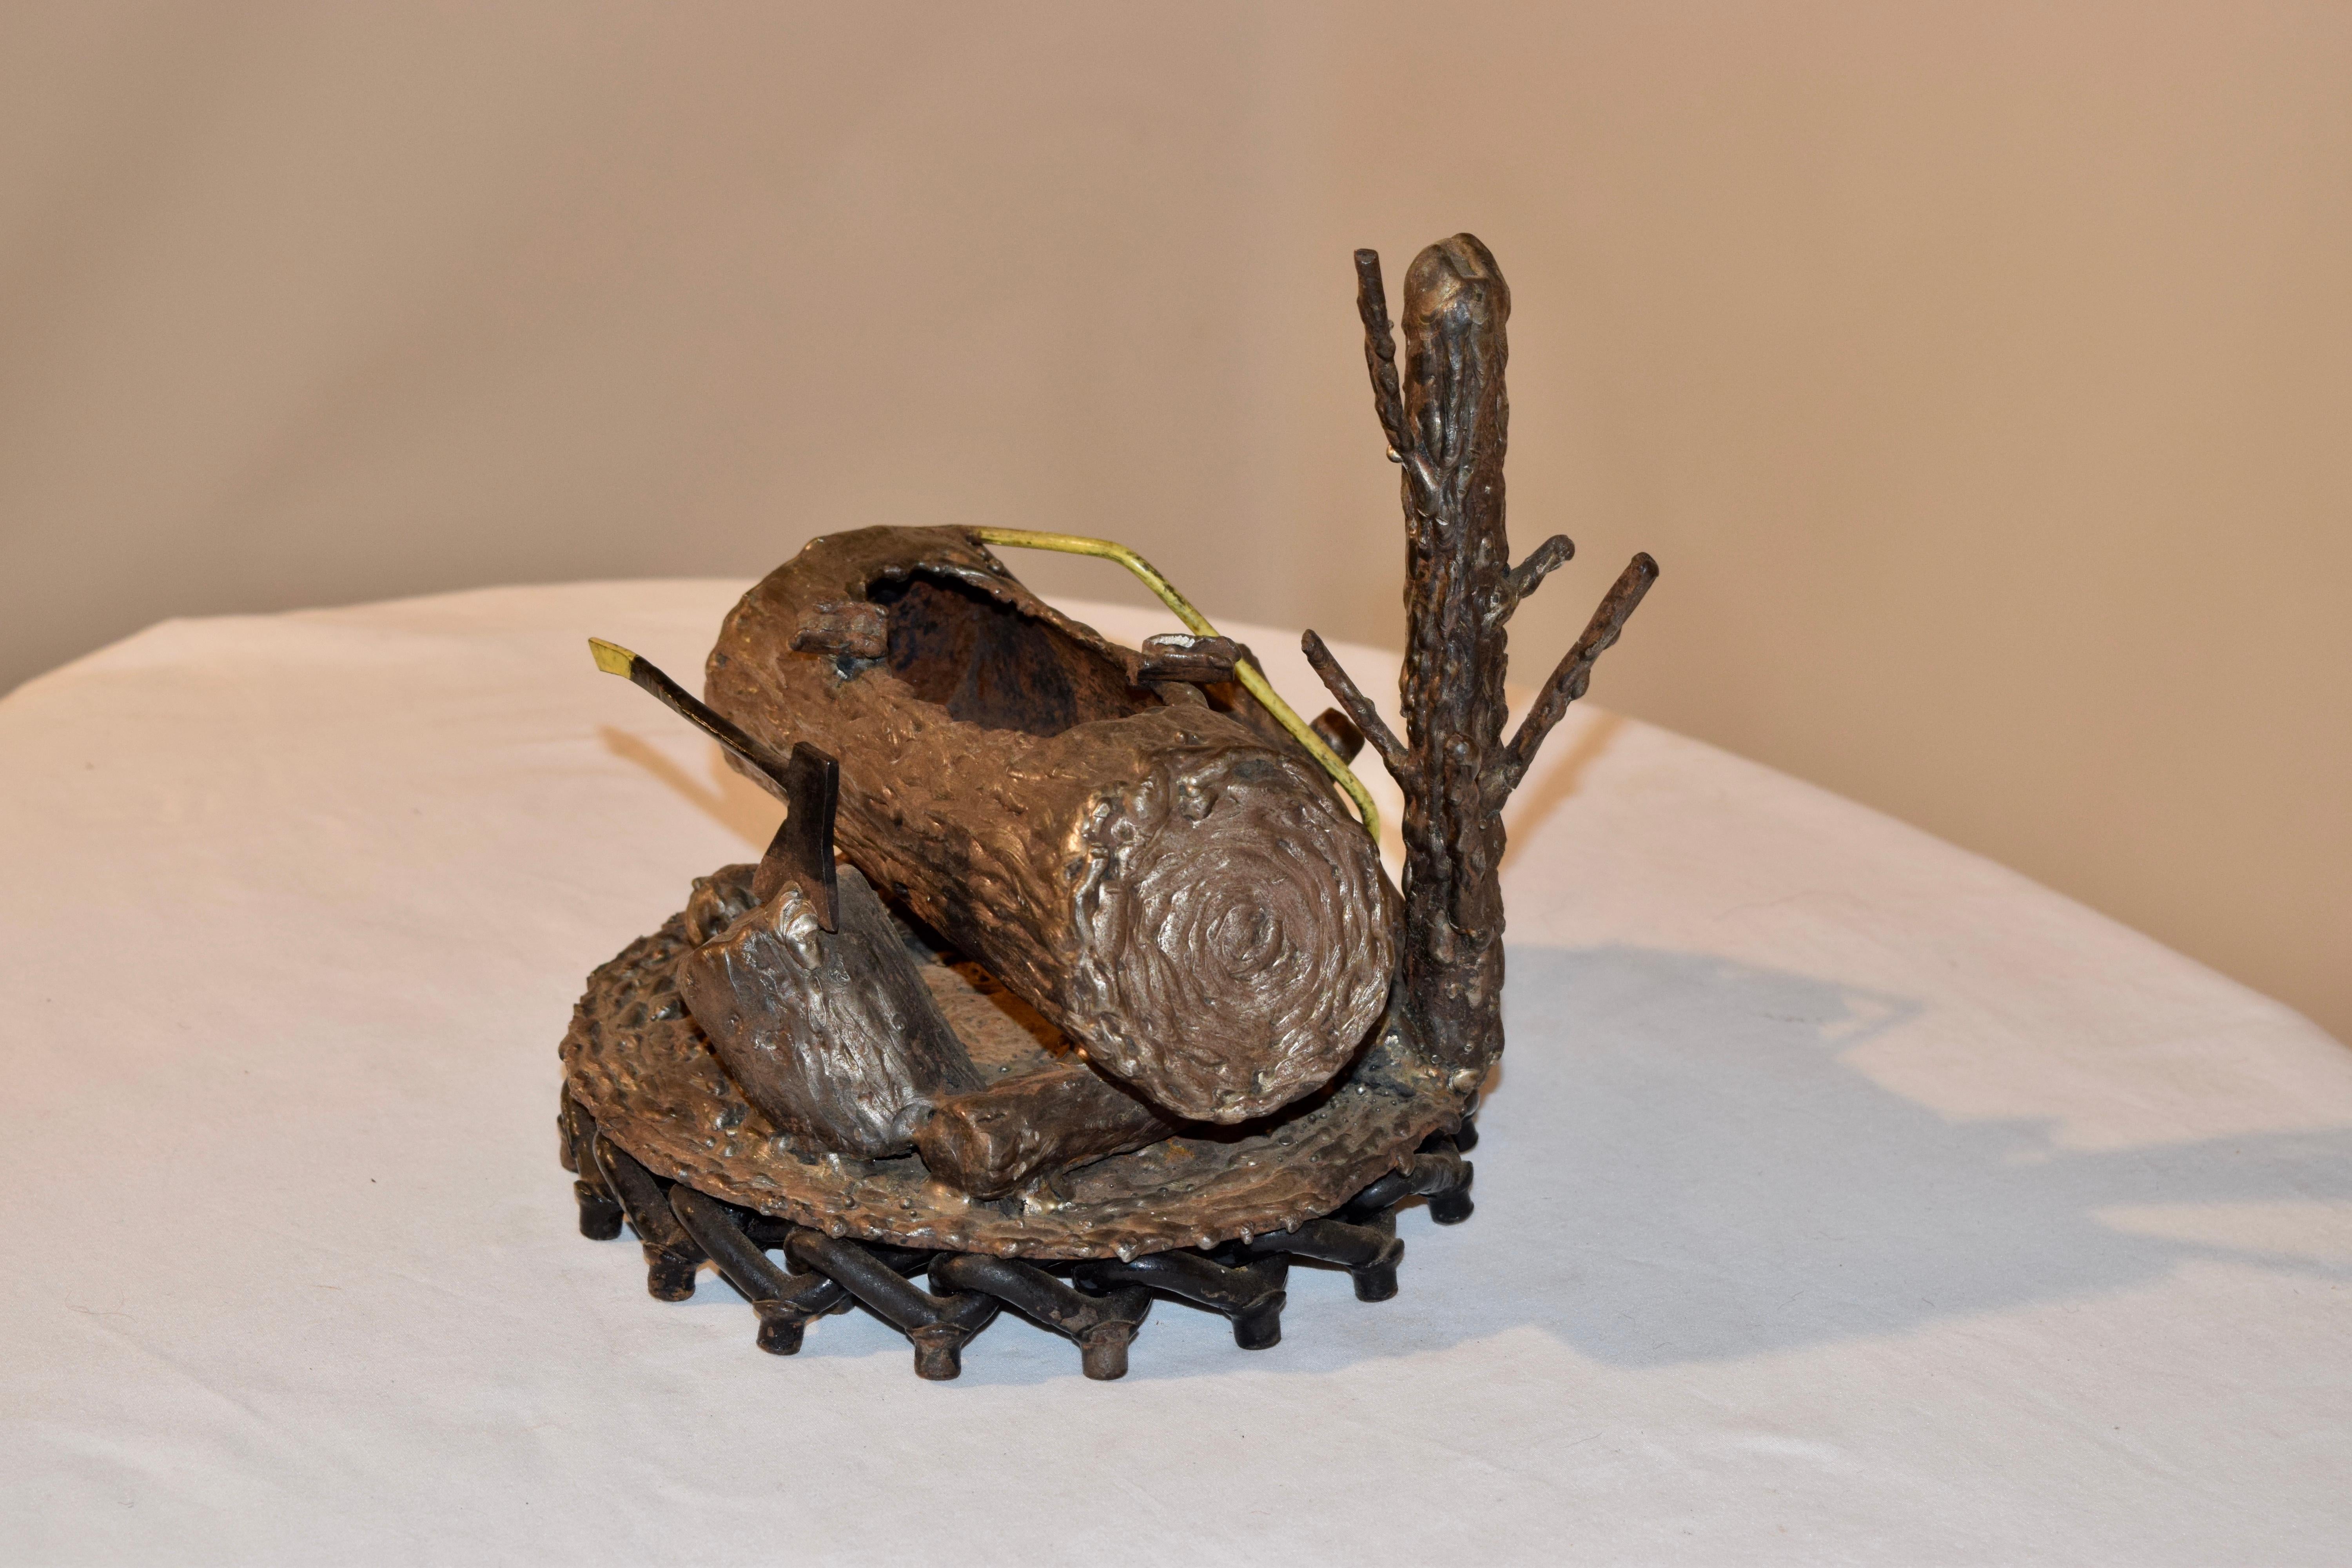 Early 20th century American foundry art ashtray made from iron slag. It is in the form of a tree stump standing behind a large hollowed out log, with a saw resting on one side of the log and an axe stuck in a stump on the other side. It is on an